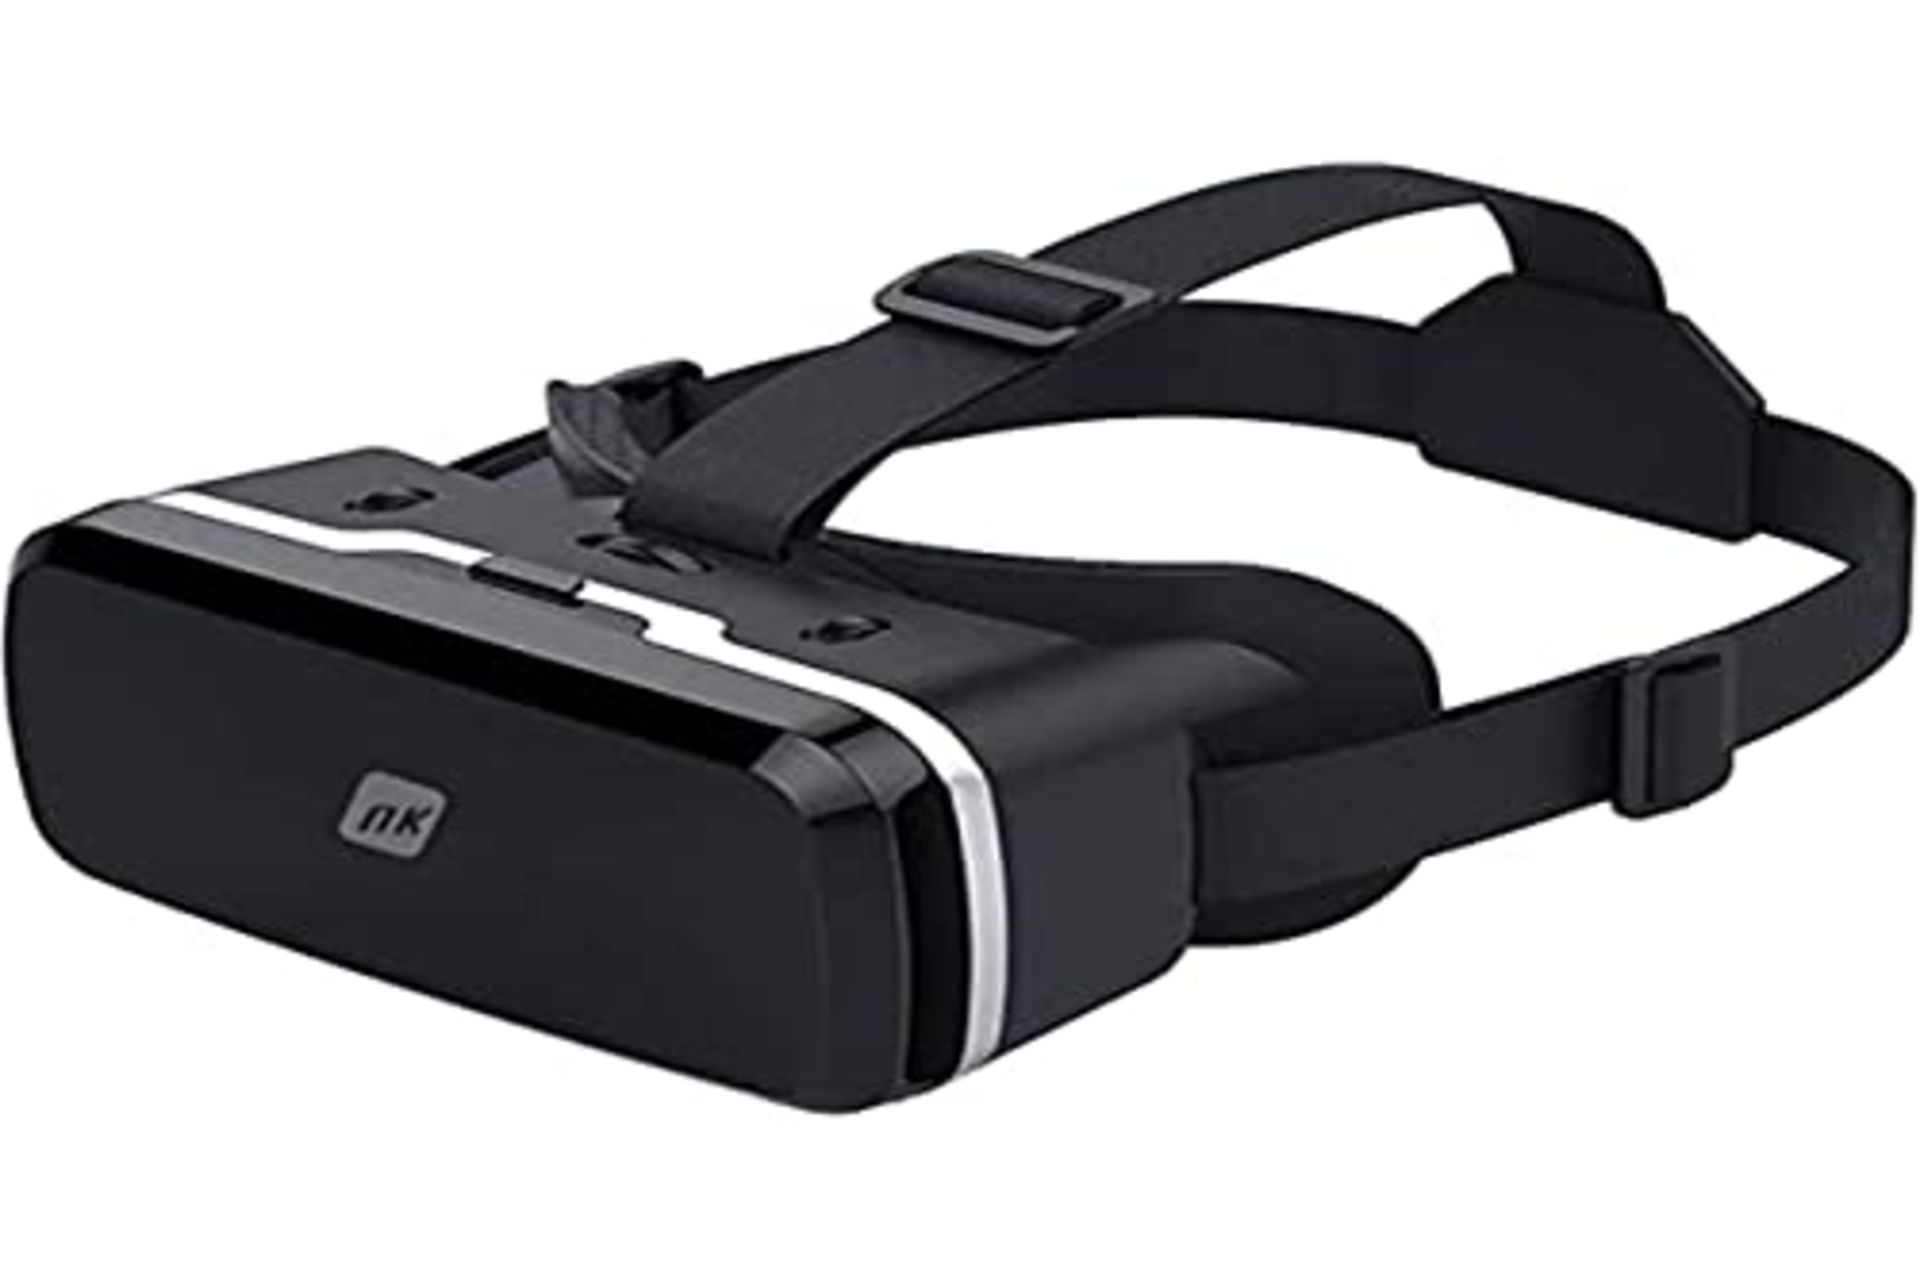 NK 3D VR Glasses for Smartphones - Smart Virtual Reality Headsets for Smartphones betw